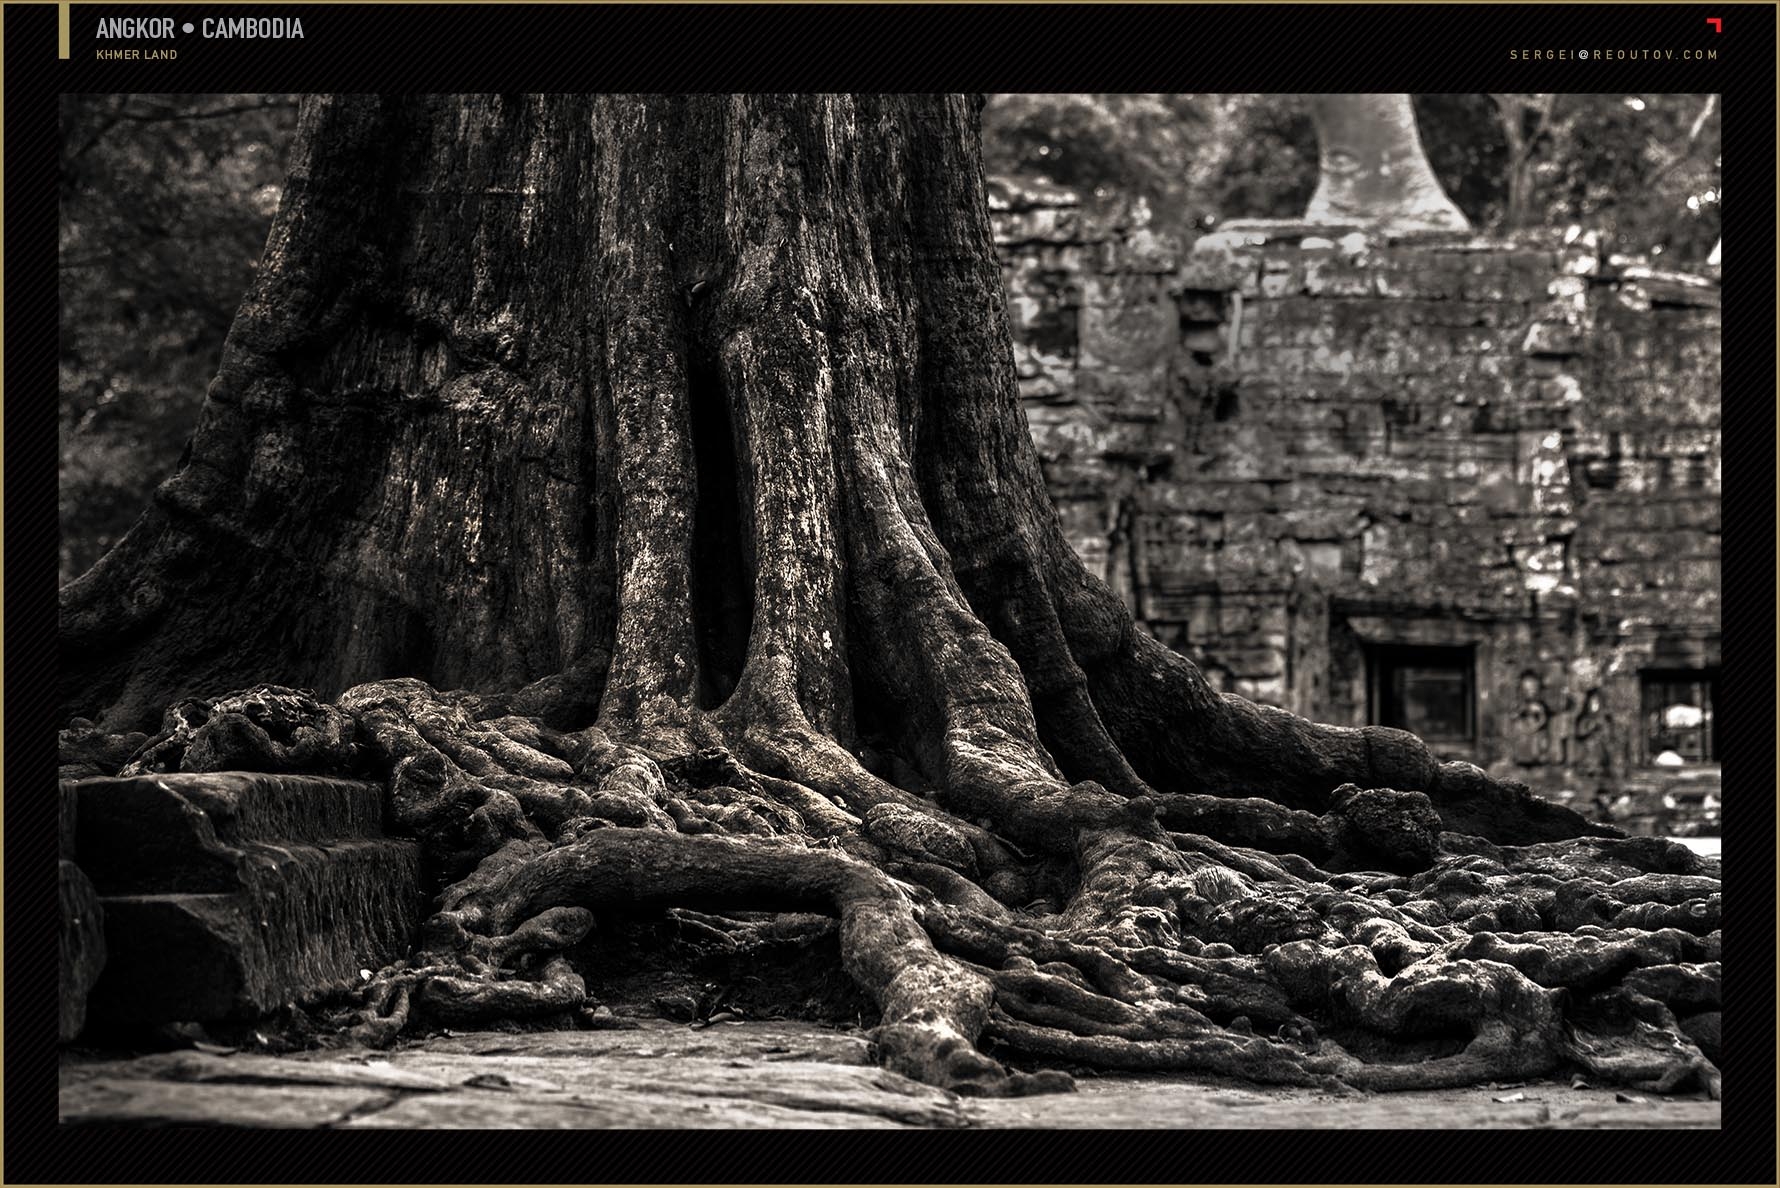 Tree with ruins in Cambodia